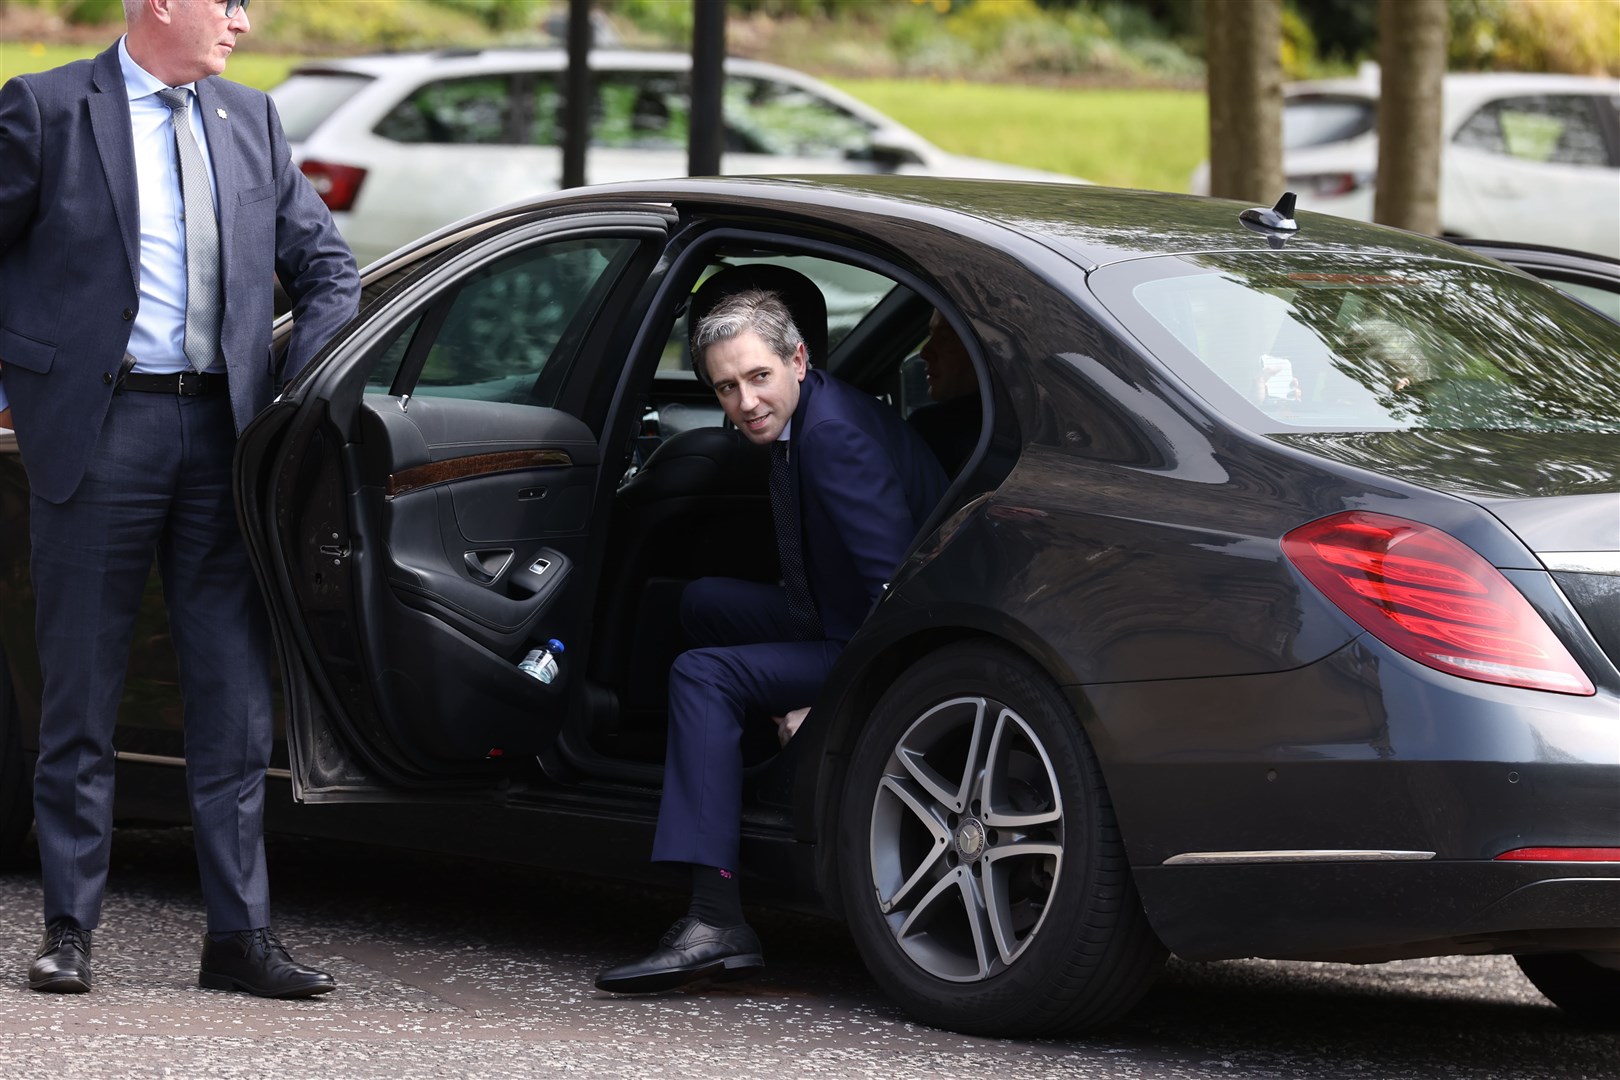 Taoiseach Simon Harris arriving at Stormont Castle as makes his first official visit to Northern Ireland (Liam McBurney/PA)